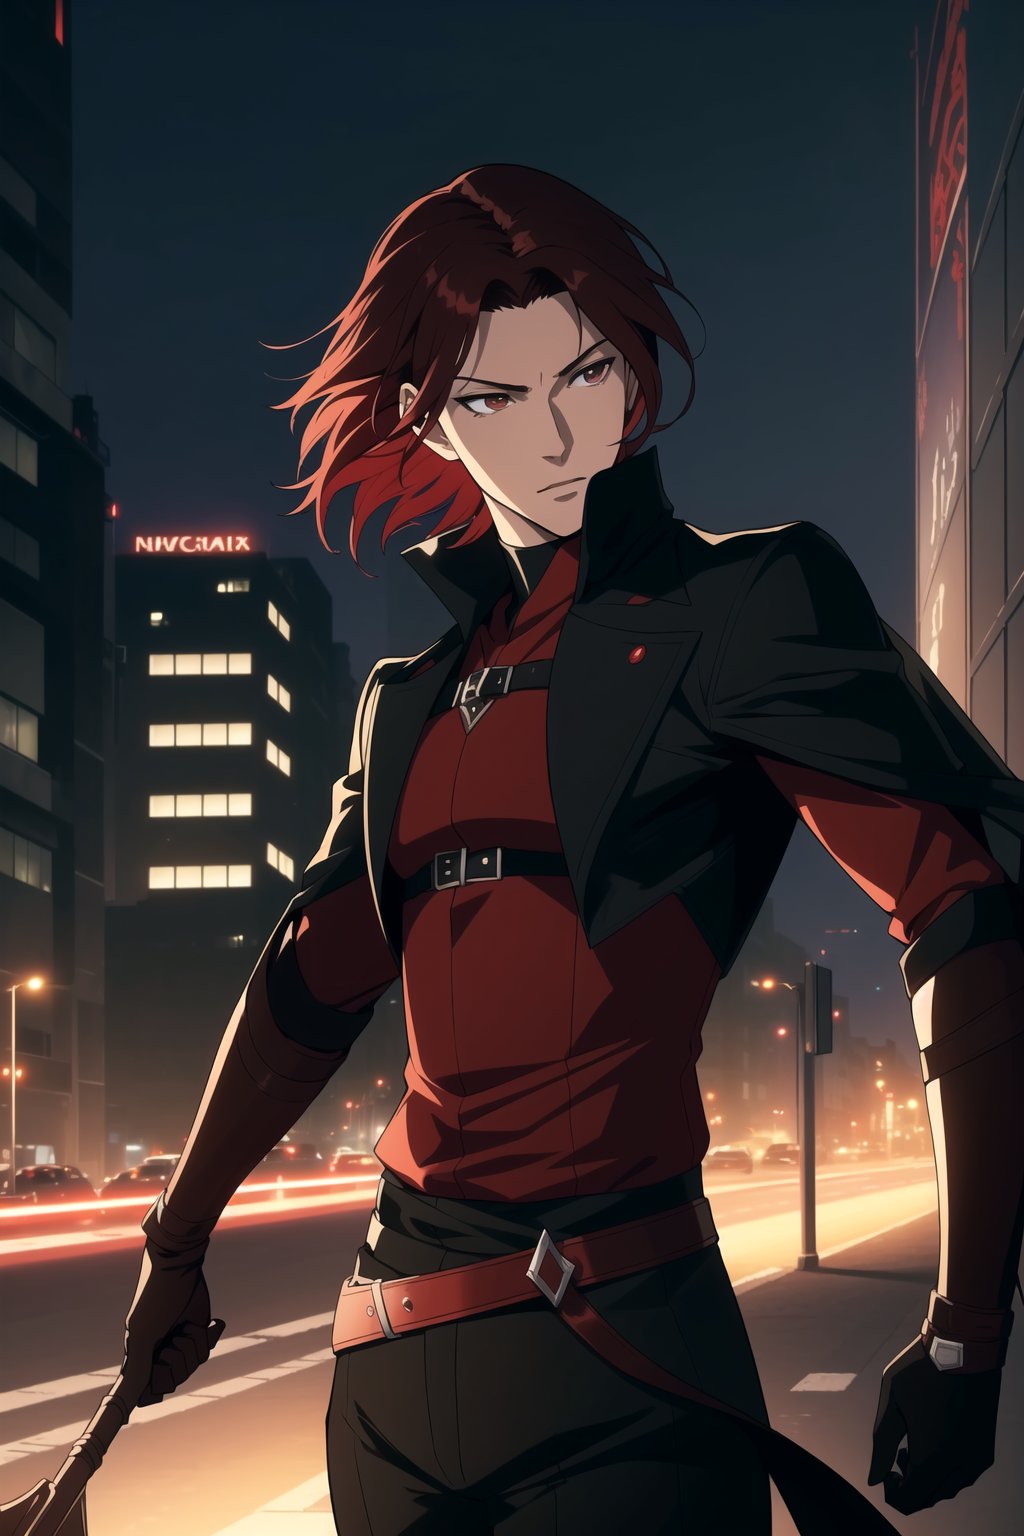 (Masterpiece, Best Quality), (A Skillful 25-Year-Old Japanese Male Secret Agent), (Wavy Short Crimson Hair:1.2), (Pale Skin), (Brown Eyes), (Wearing Black and Red Sleek Tactical Outfit:1.4), (Modern City Road at Night:1.4), (Dynamic Pose:1.2), Centered, (Half Body Shot:1.4), (From Front Shot:1.4), Insane Details, Intricate Face Detail, Intricate Hand Details, Cinematic Shot and Lighting, Realistic and Vibrant Colors, Sharp Focus, Ultra Detailed, Realistic Images, Depth of Field, Incredibly Realistic Environment and Scene, Master Composition and Cinematography, castlevania style,castlevania style